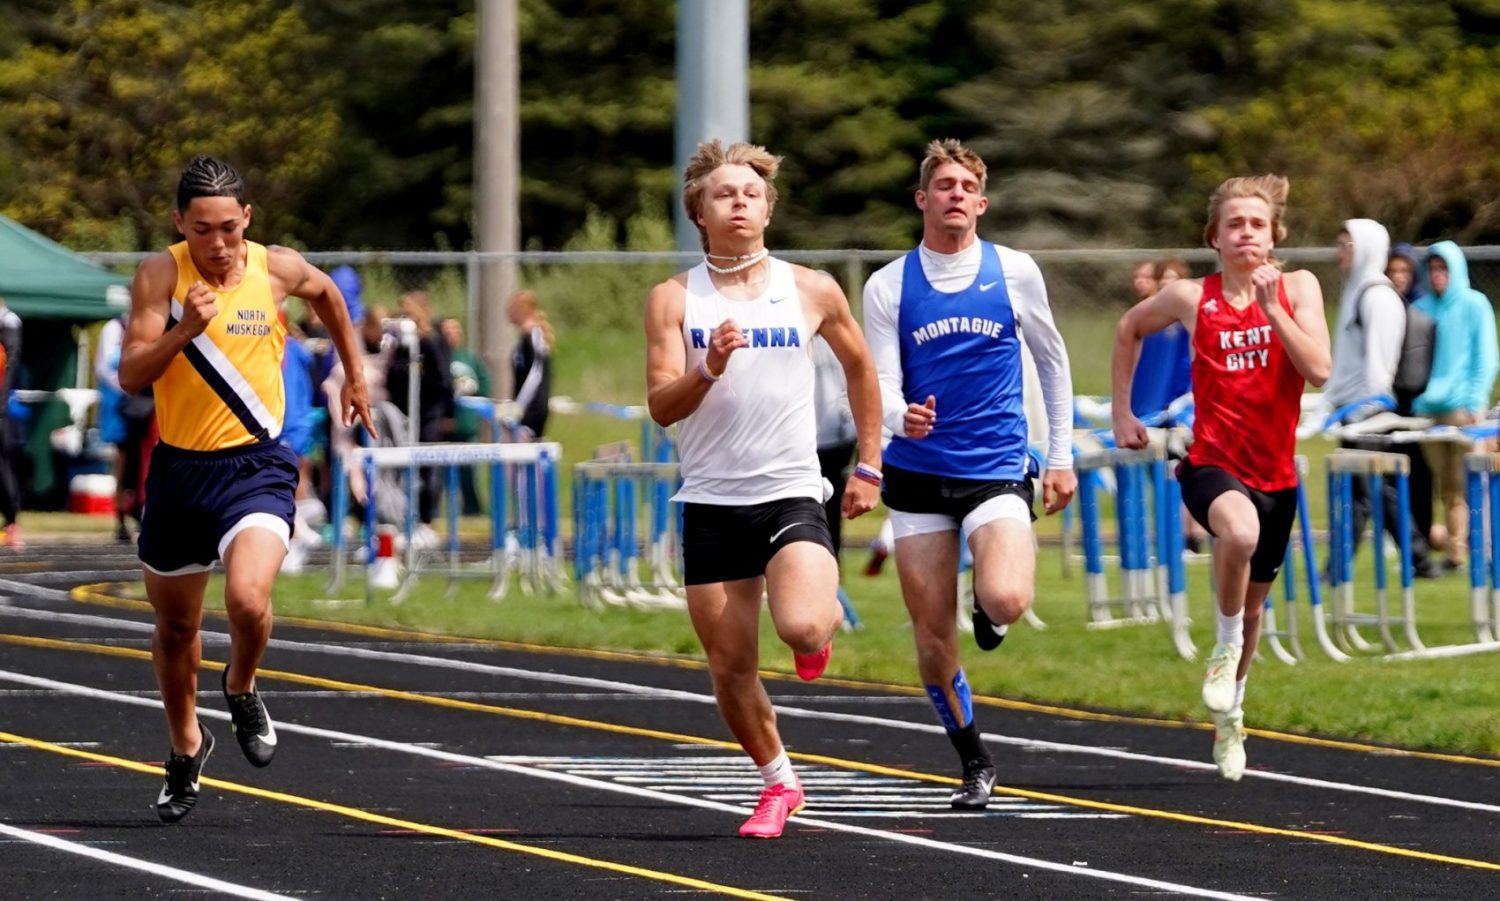 Montague boys win Division 3 regional track championship